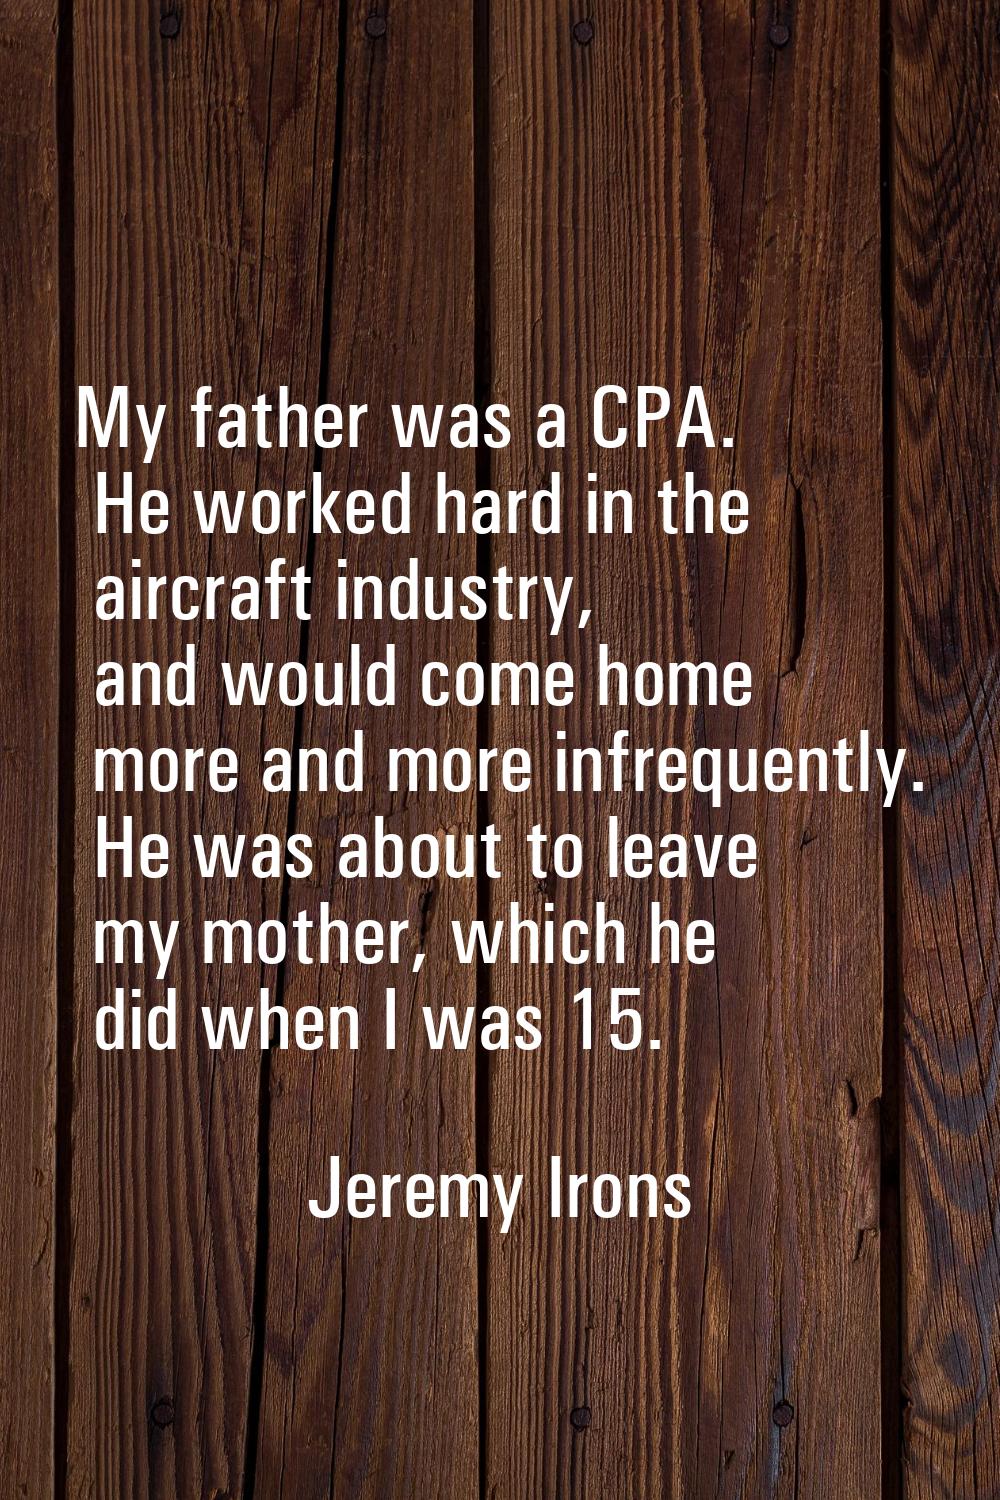 My father was a CPA. He worked hard in the aircraft industry, and would come home more and more inf